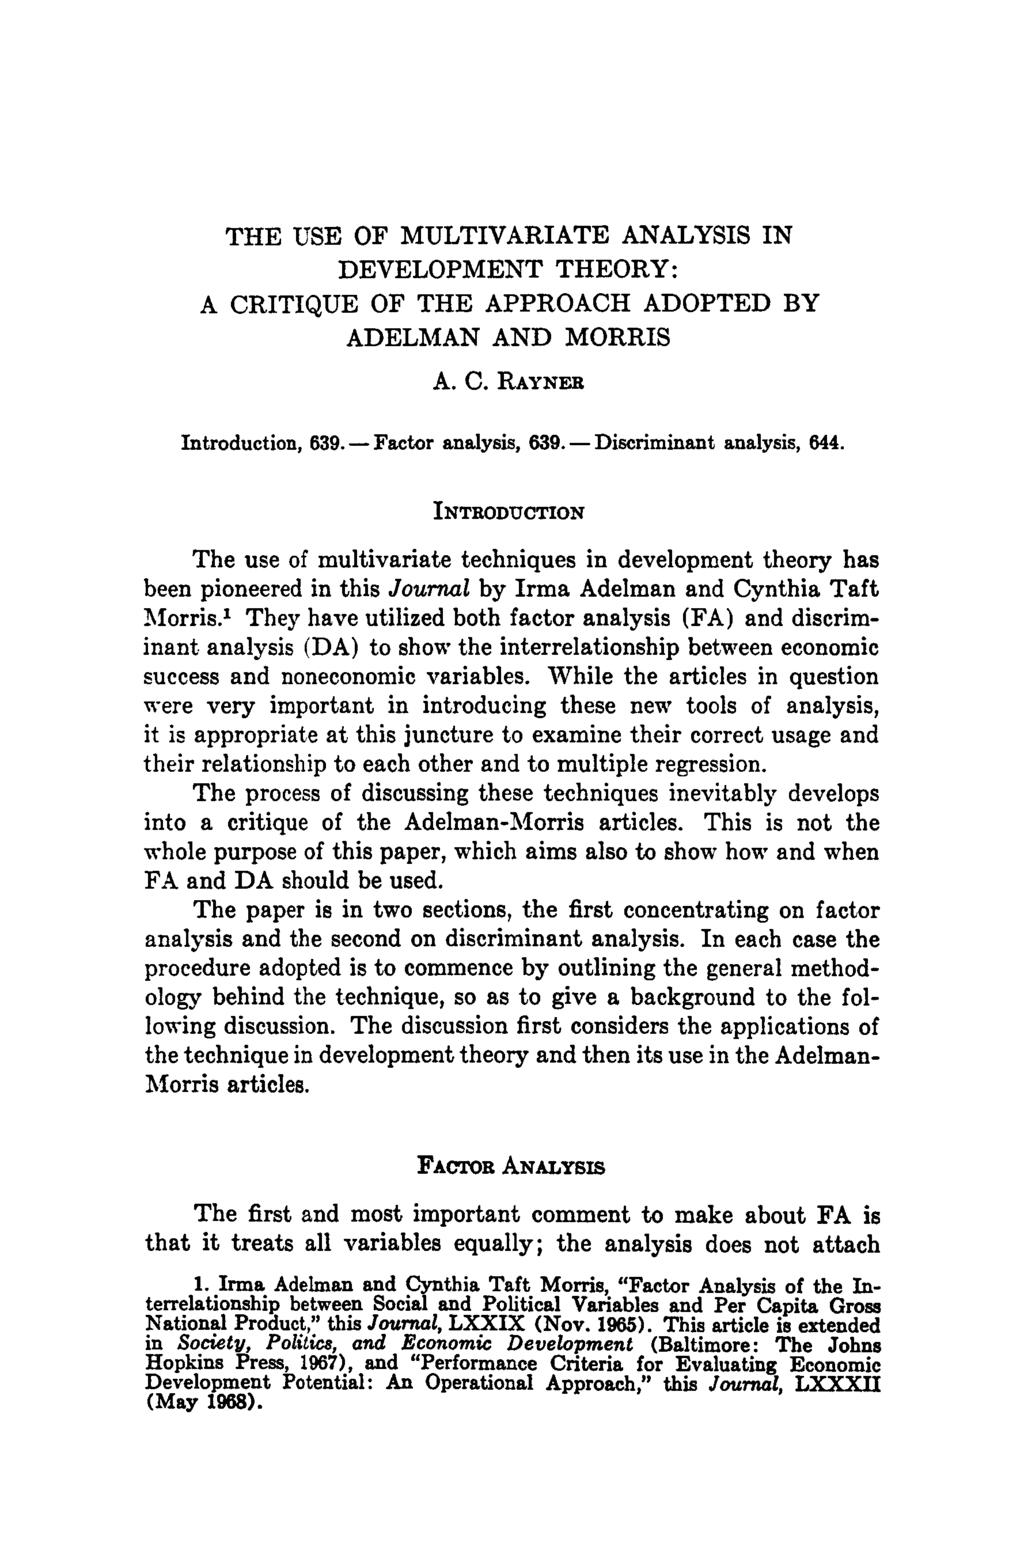 THE USE OF MULTIVARIATE ANALYSIS IN DEVELOPMENT THEORY: A CRITIQUE OF THE APPROACH ADOPTED BY ADELMAN AND MORRIS A. C. RAYNER Introduction, 639. Factor analysis, 639. Discriminant analysis, 644.